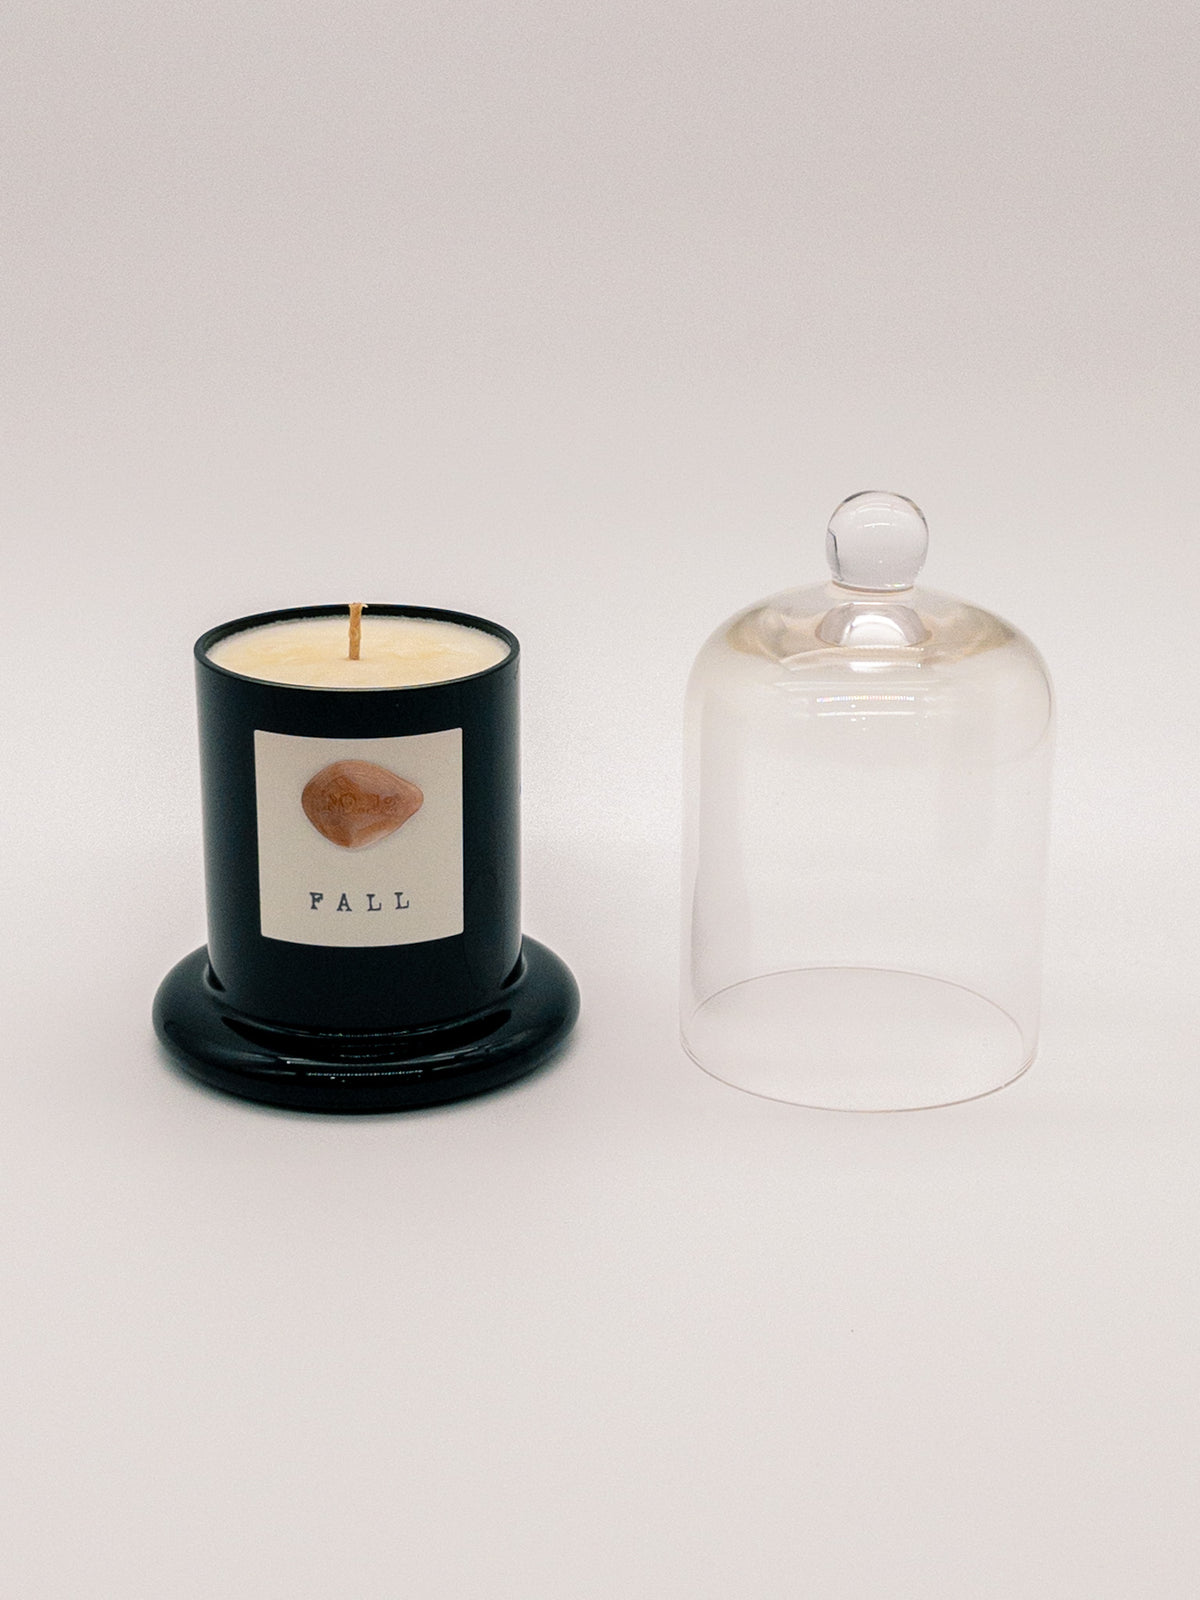 Fall No. 12 candle with clear glass cloche cover